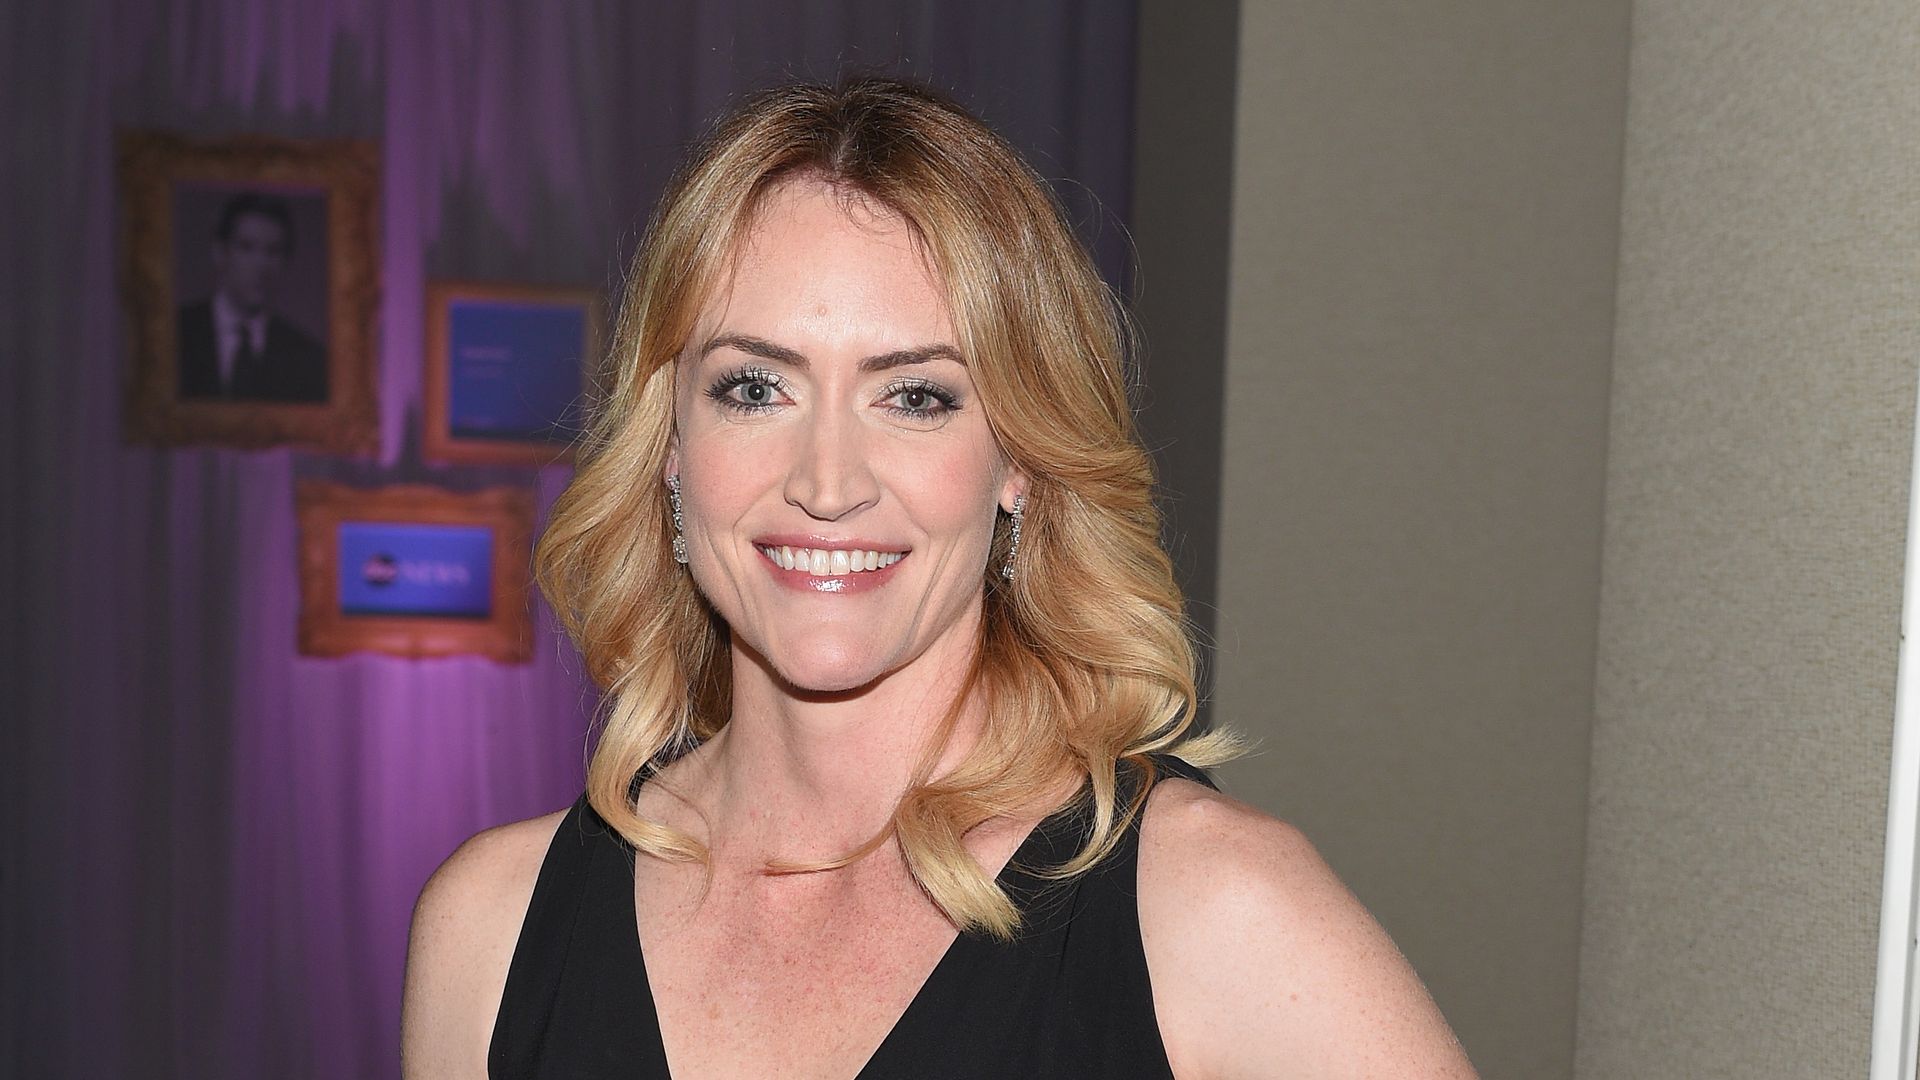 Heather Armstrong attends the Yahoo News/ABC News White House Correspondents' dinner reception pre-party at the Washington Hilton on Saturday, April 25, 2015 in Washington, DC